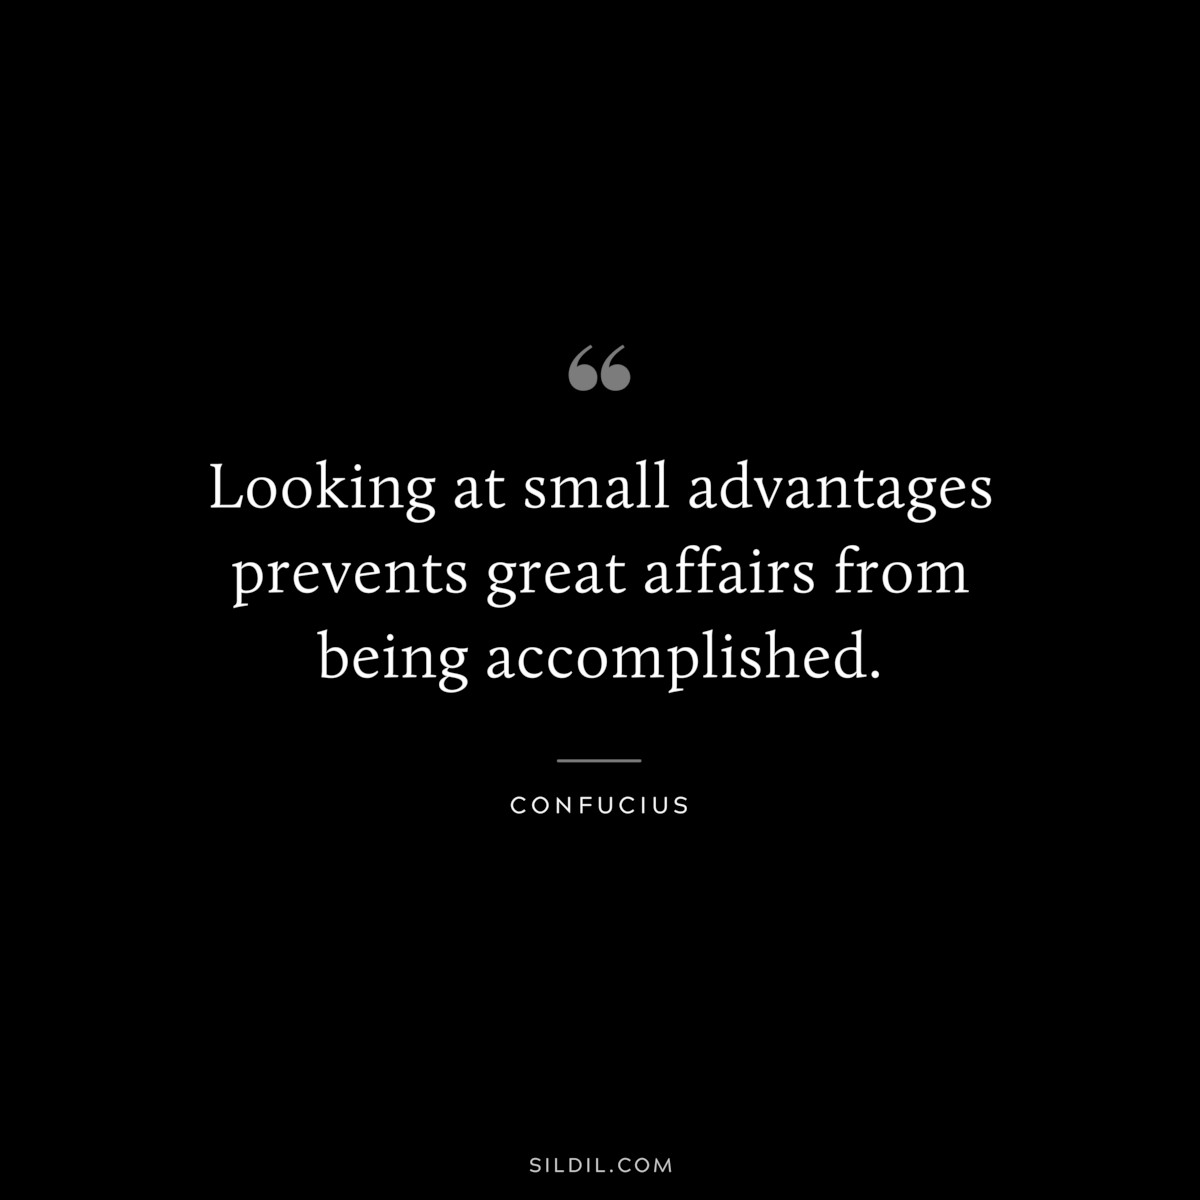 Looking at small advantages prevents great affairs from being accomplished. ― Confucius